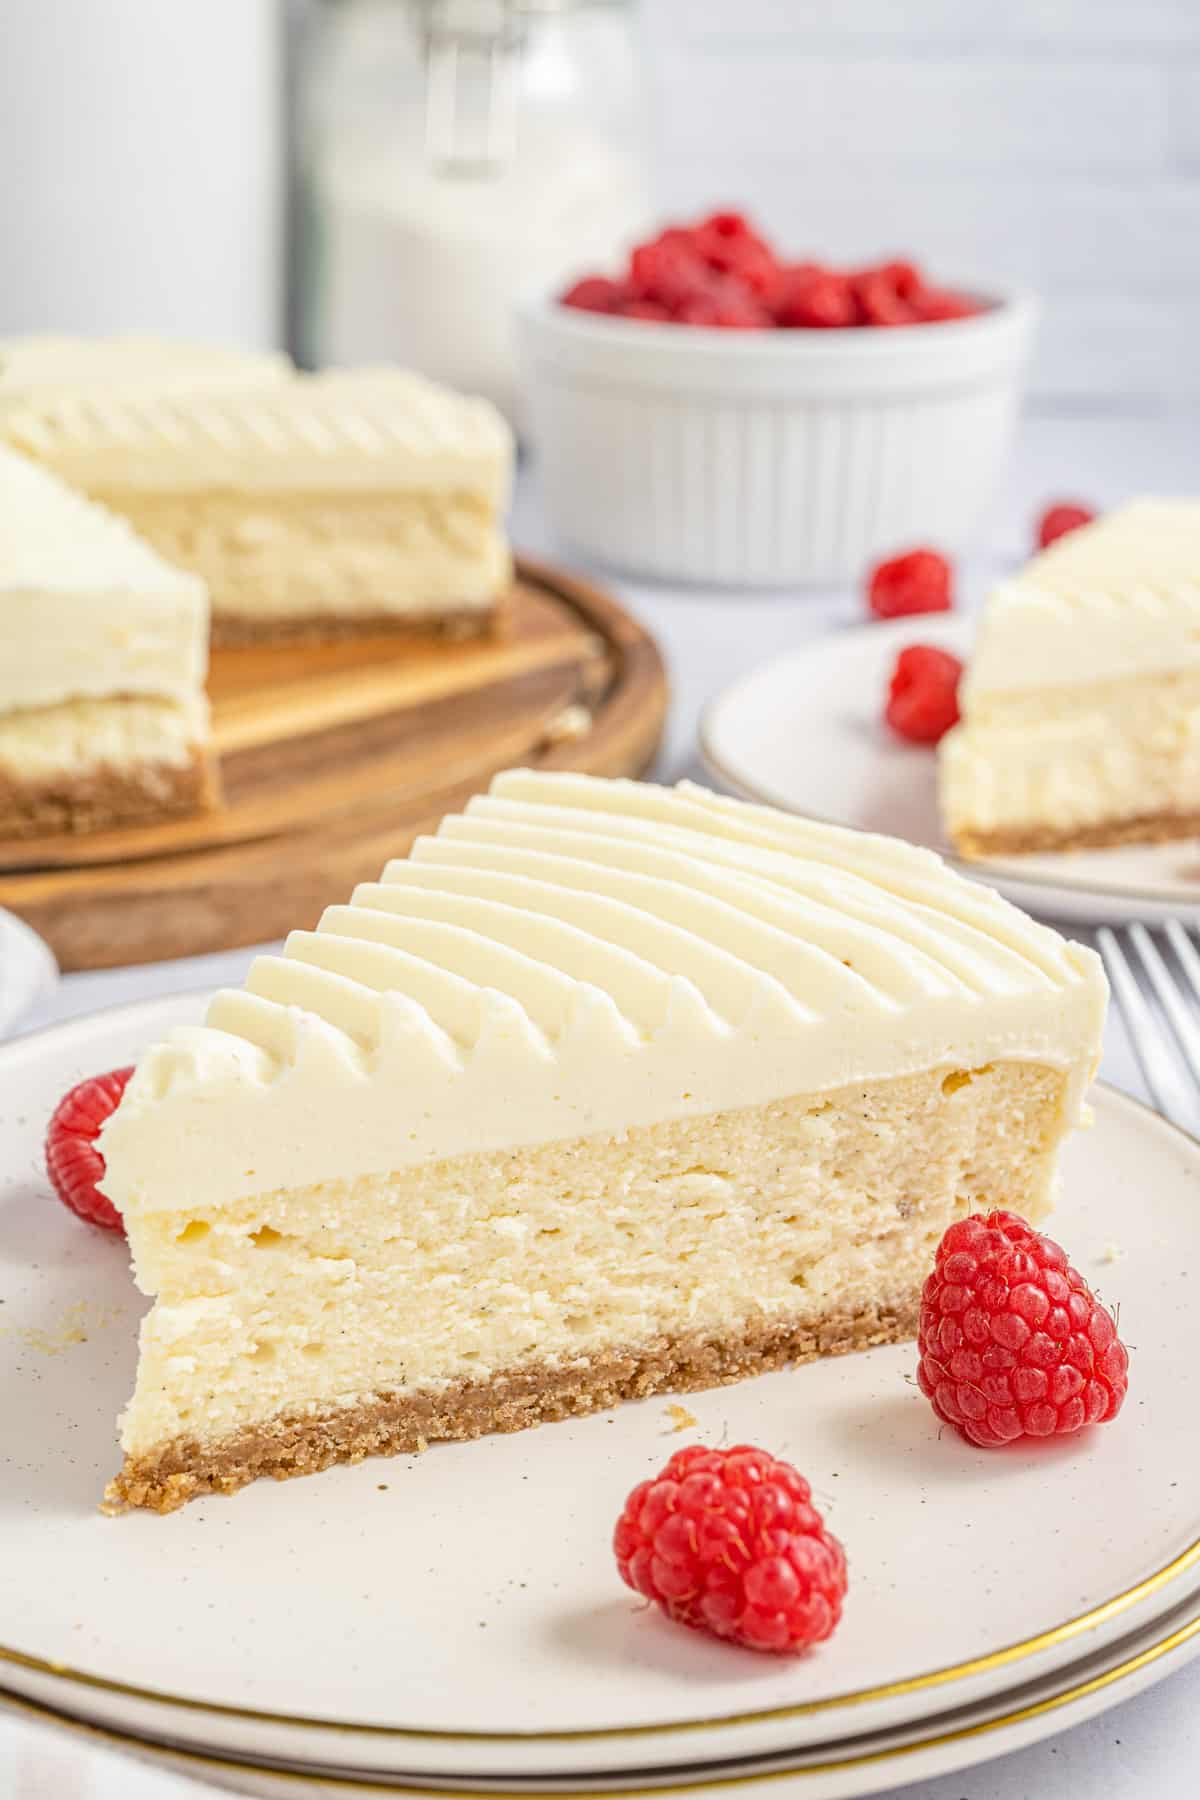 A slice of the Vanilla Bean Cheesecake on white plate with raspberries and full cheesecake in background.